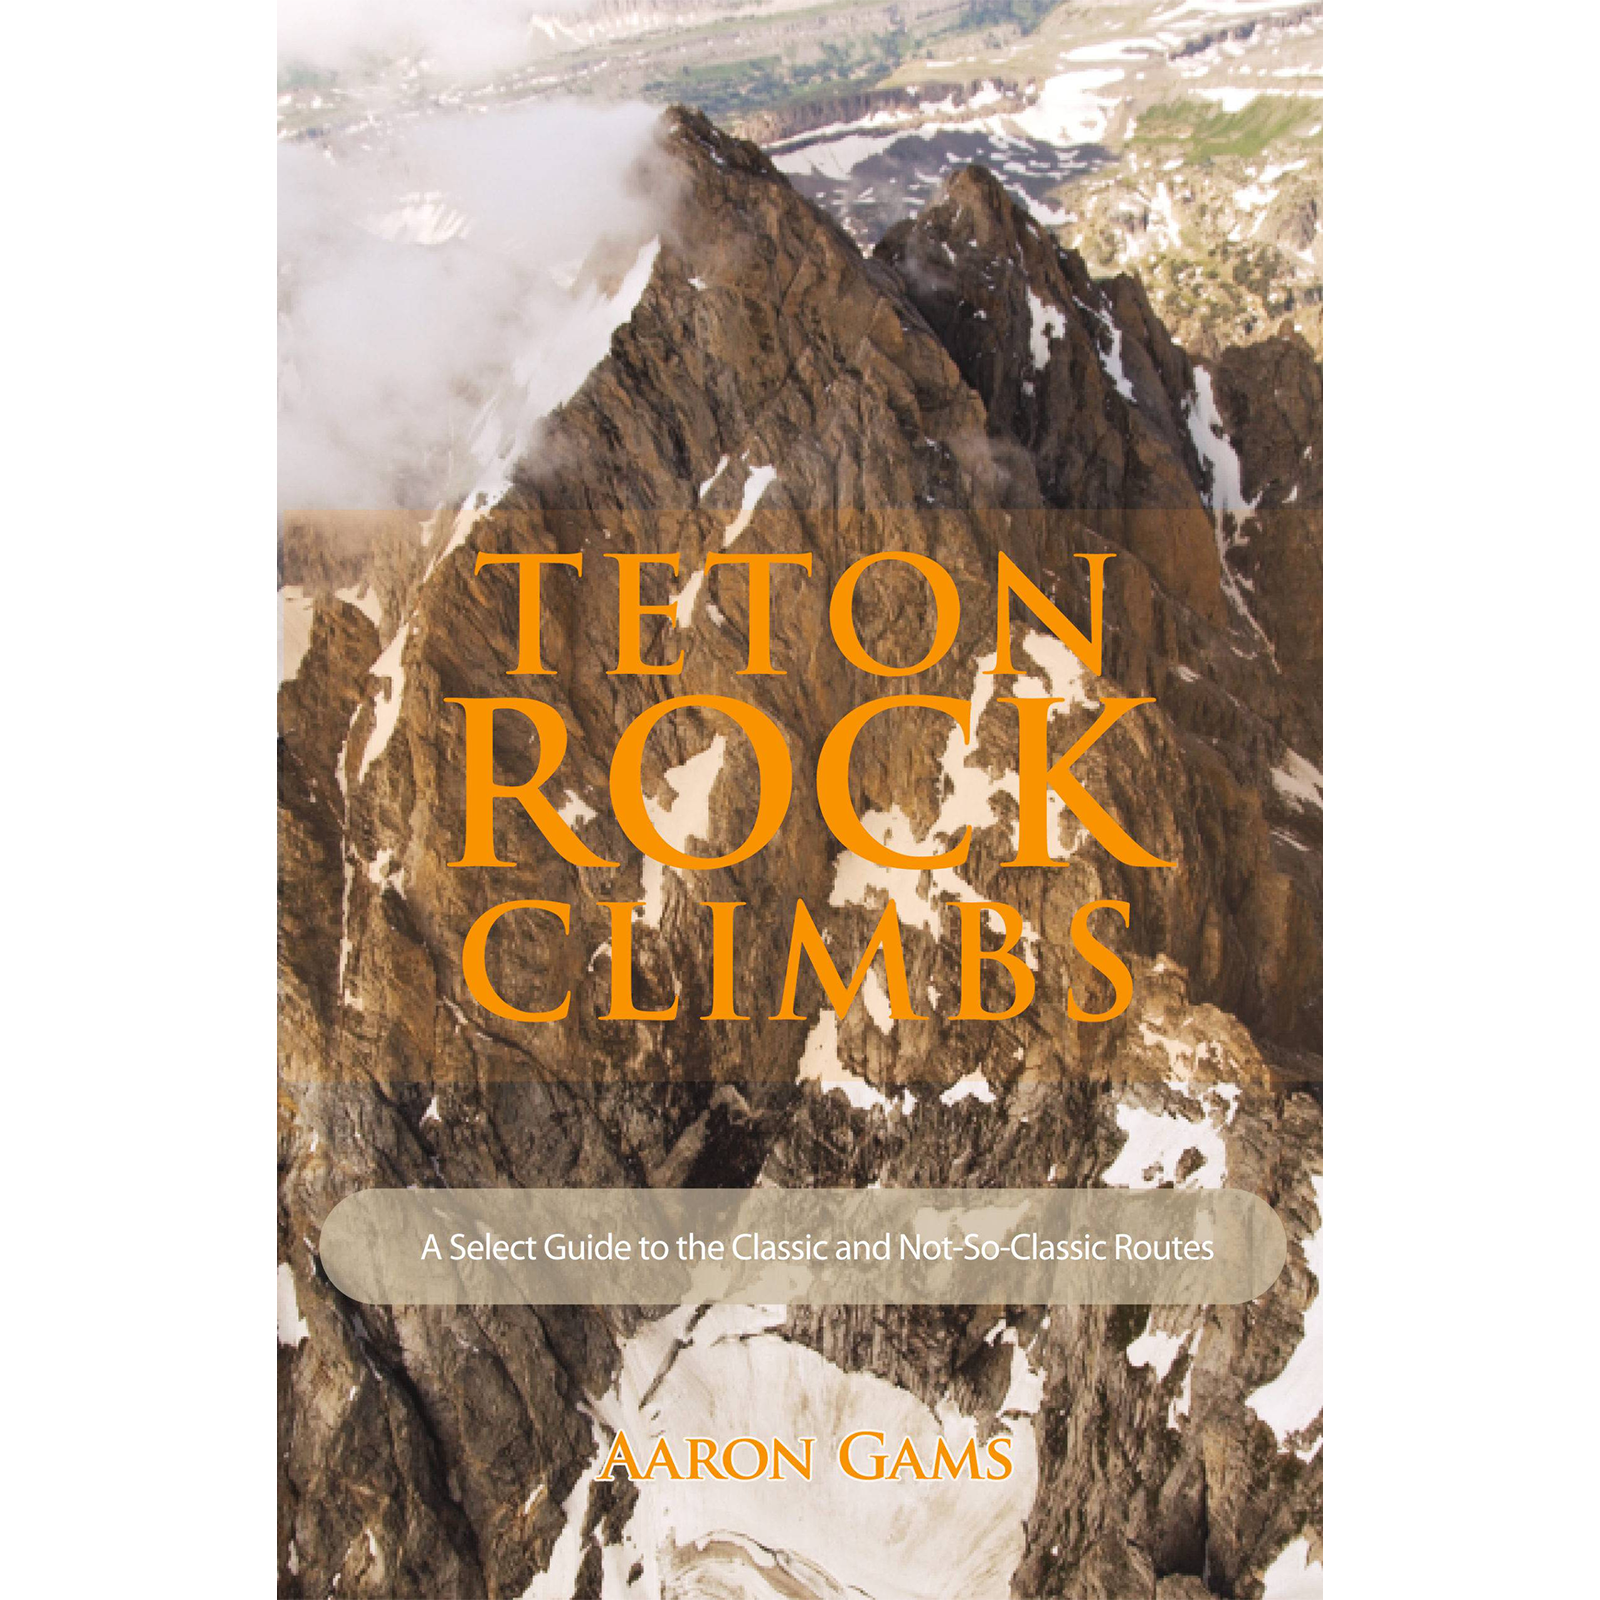 Teton Rock Climbs: A Select Guide to the Classic and Not-So-Classic Routes